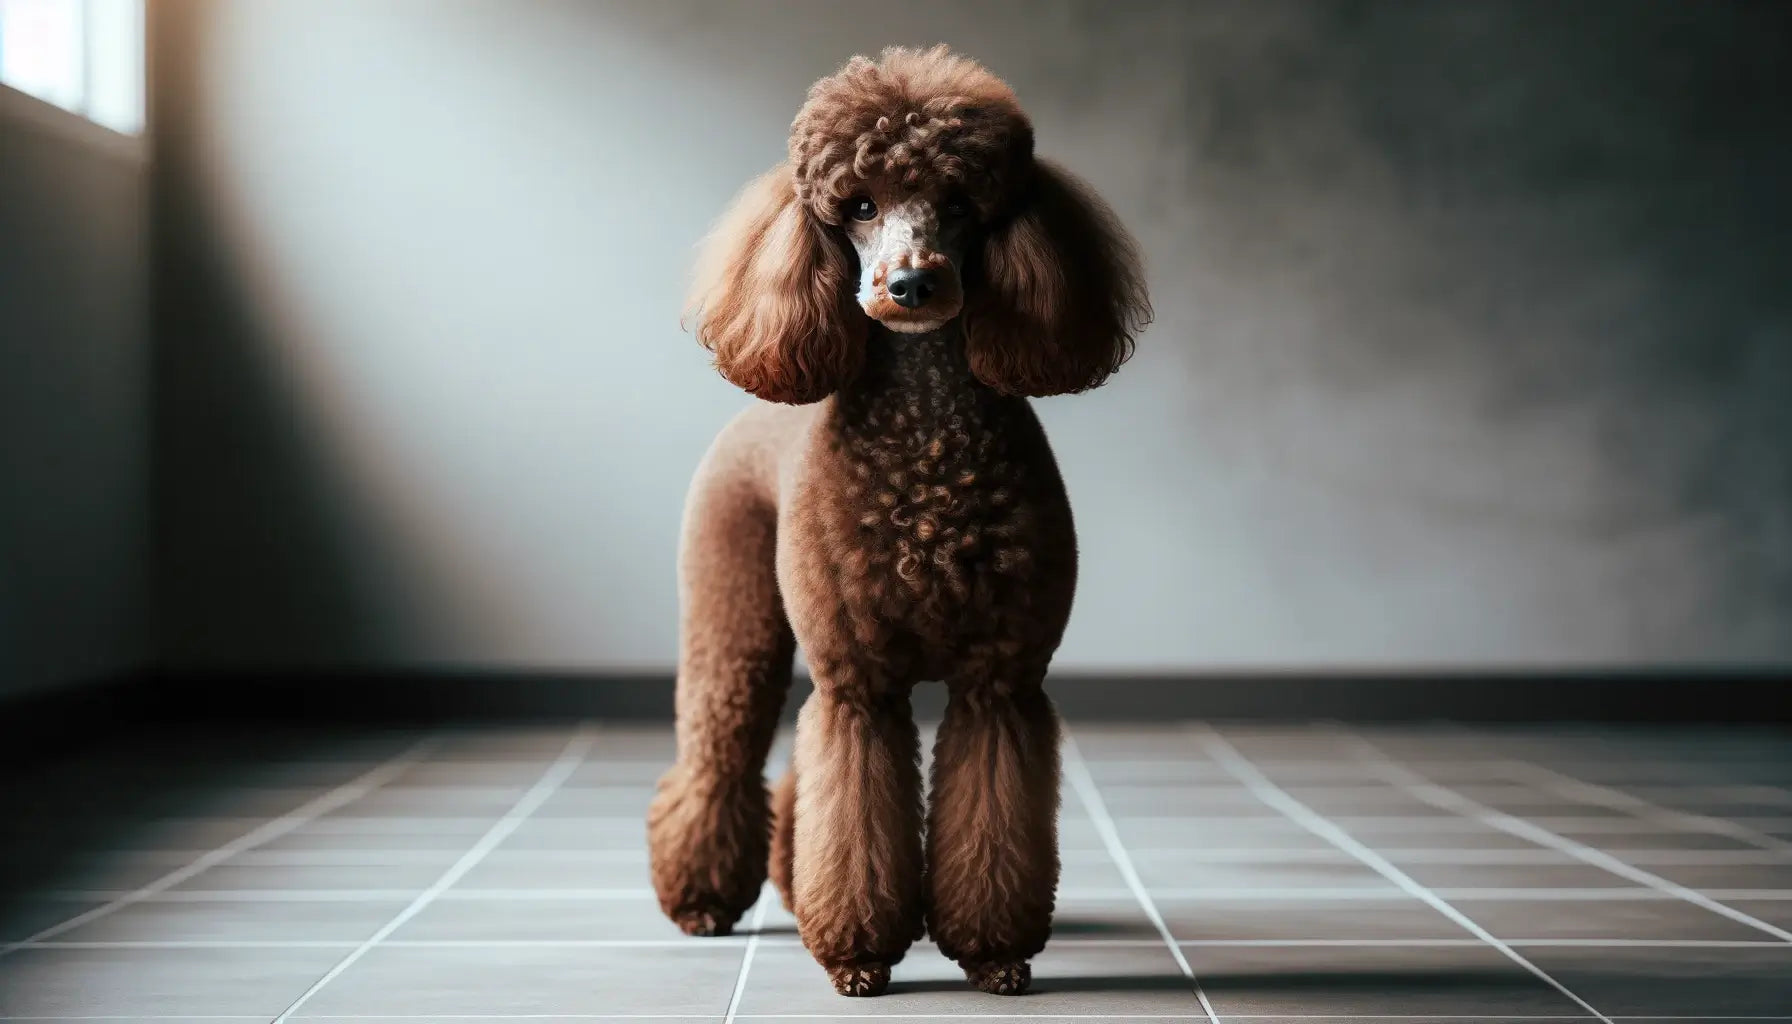 A brown Poodle standing on a tiled floor, looking directly at the camera with a poised and attentive demeanor.